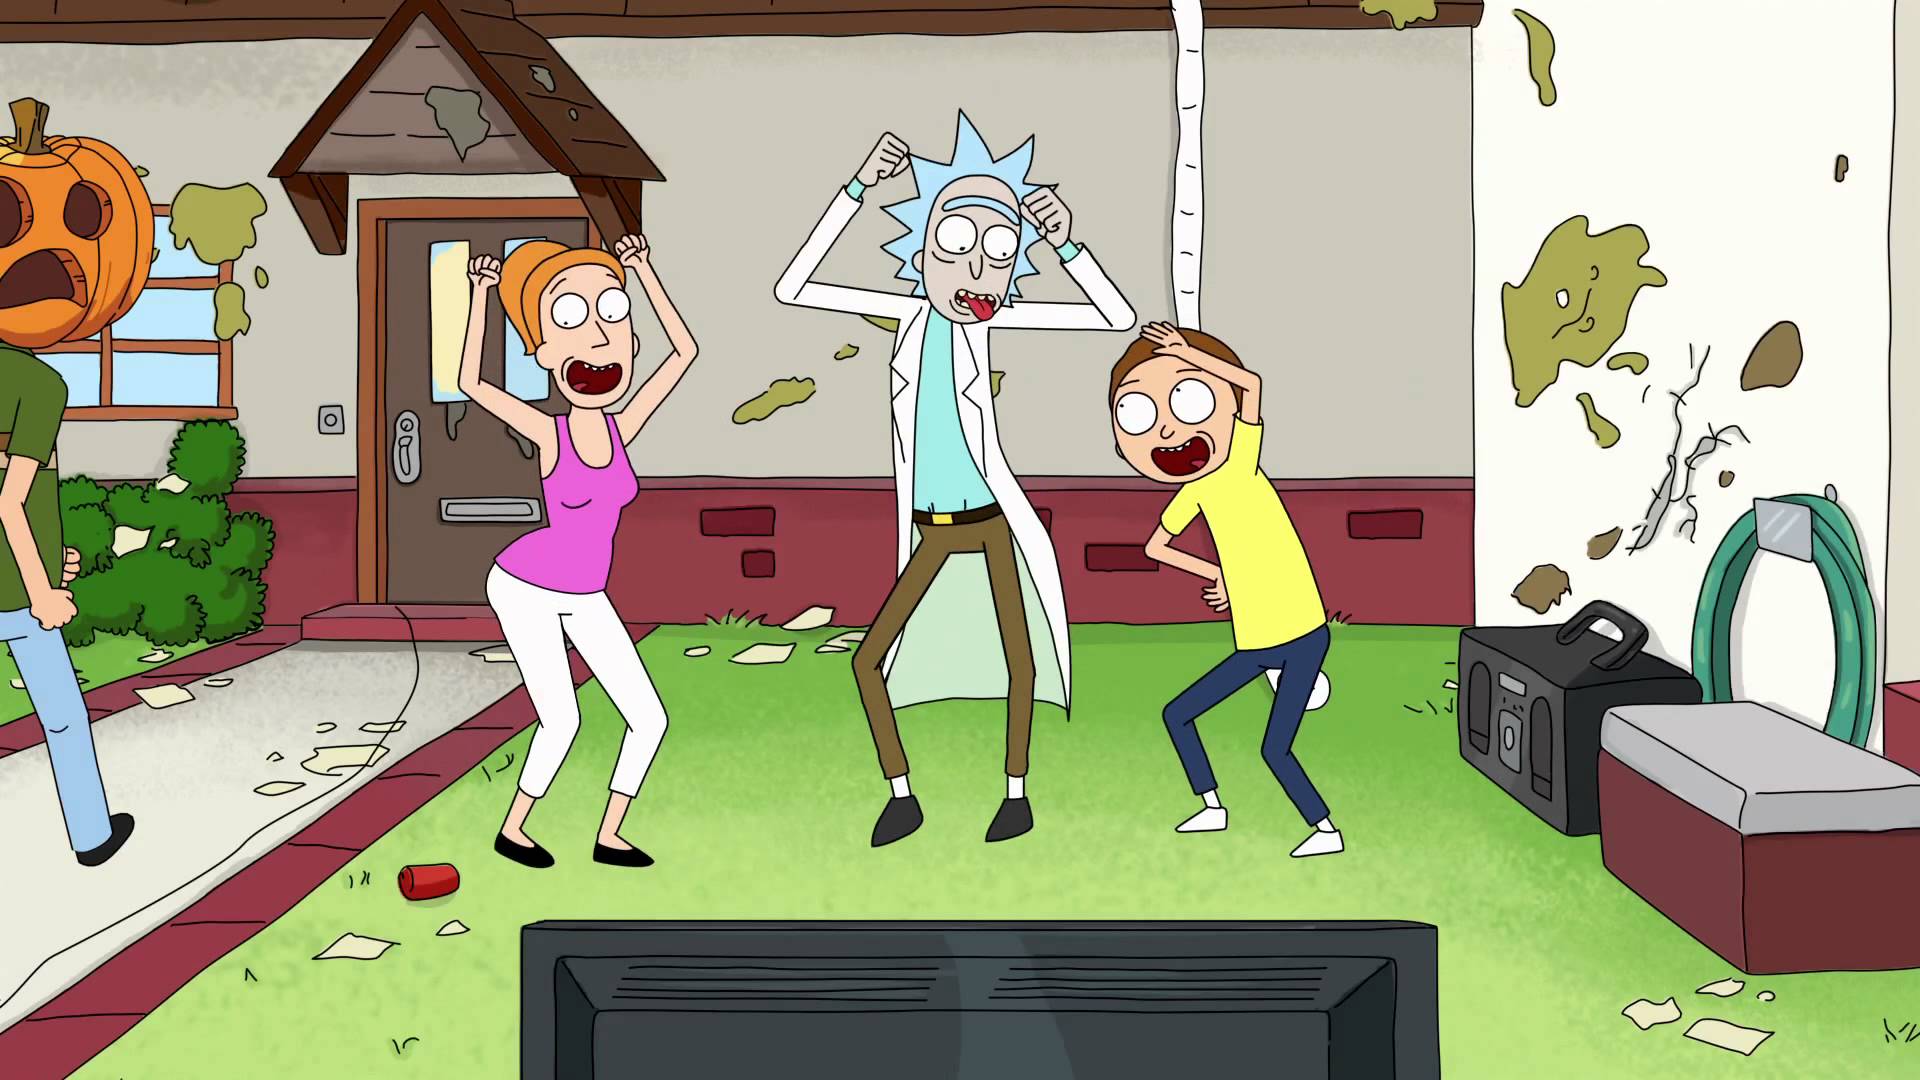 rick and morty, jerry smith, tv show, morty smith, rick sanchez, summer smith cellphone